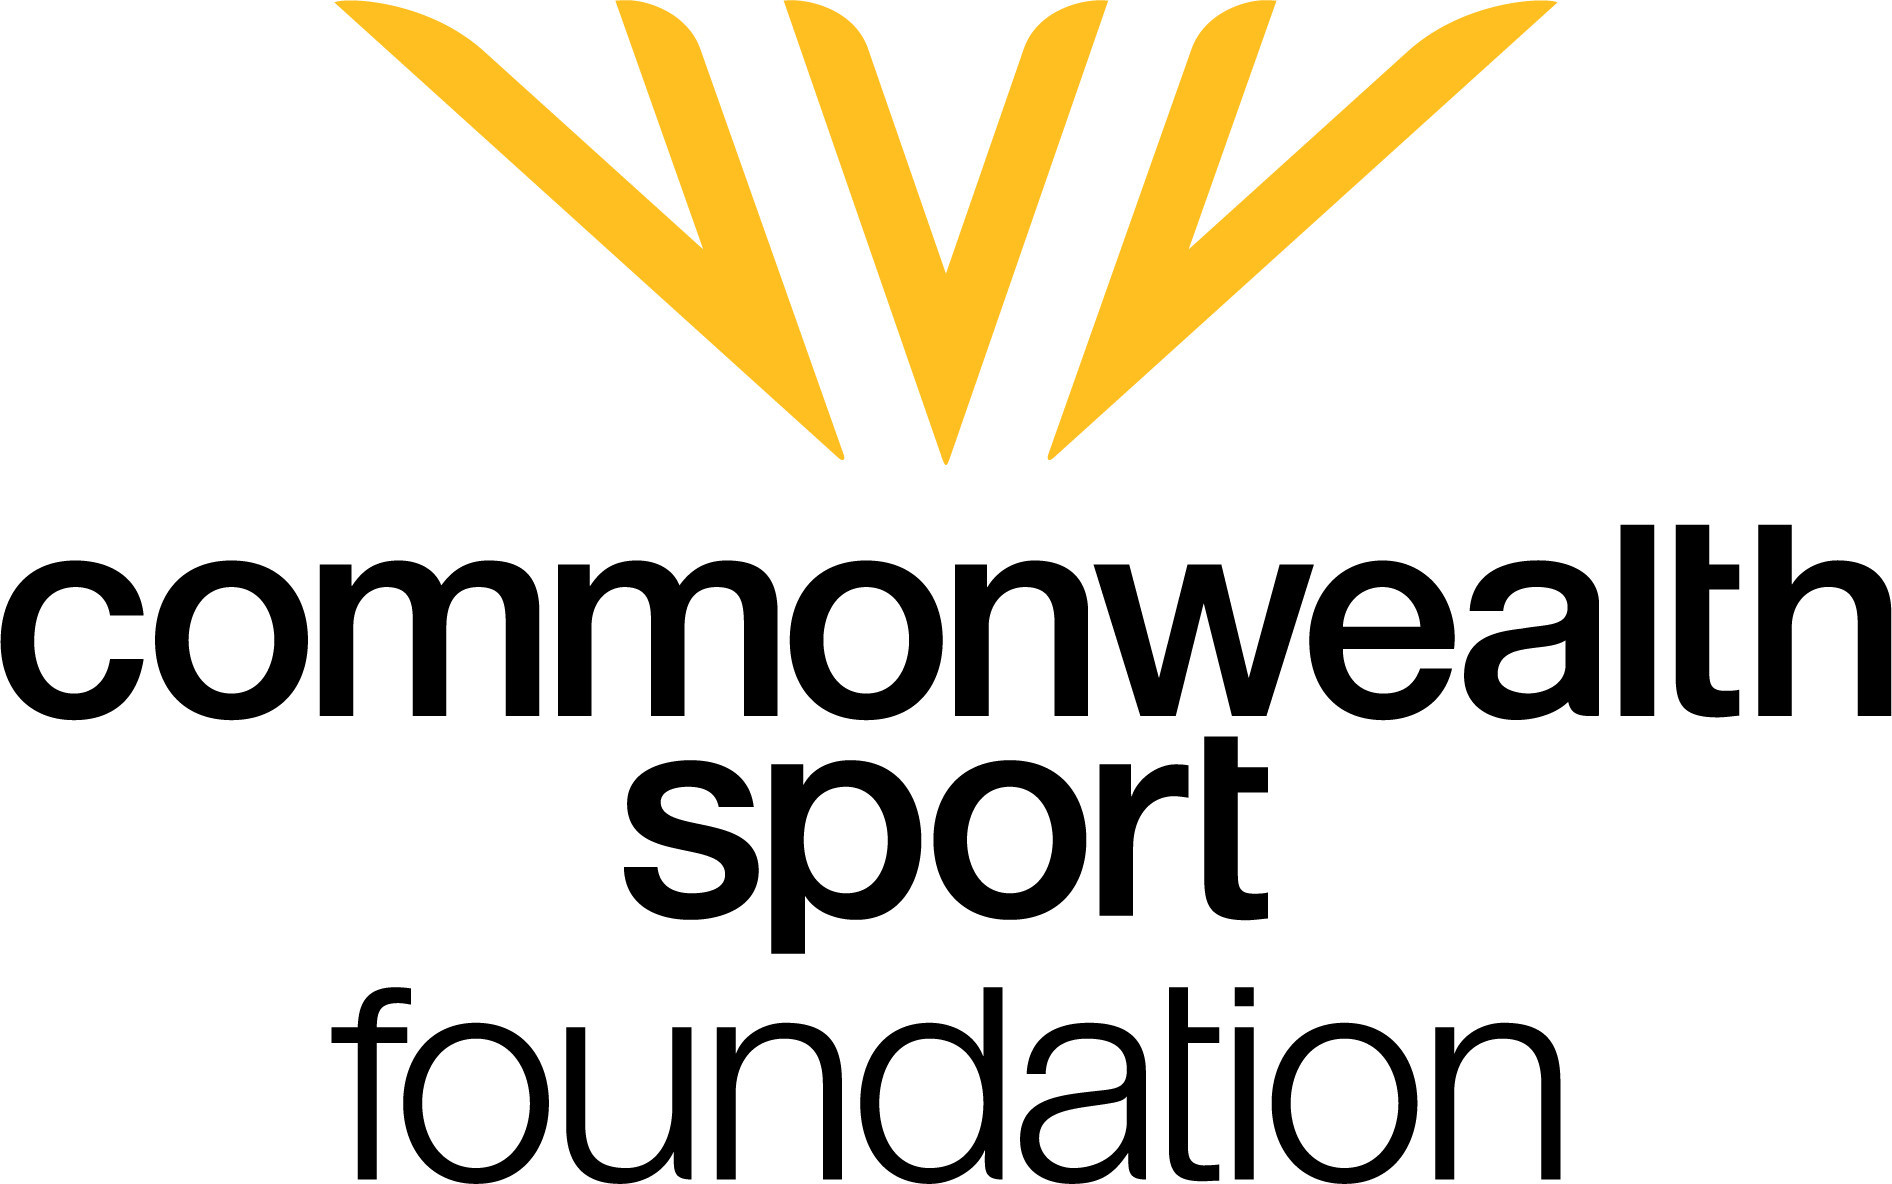 The CGF and The Prince’s Trust will deliver projects through the Commonwealth Sport Foundation ©CGF